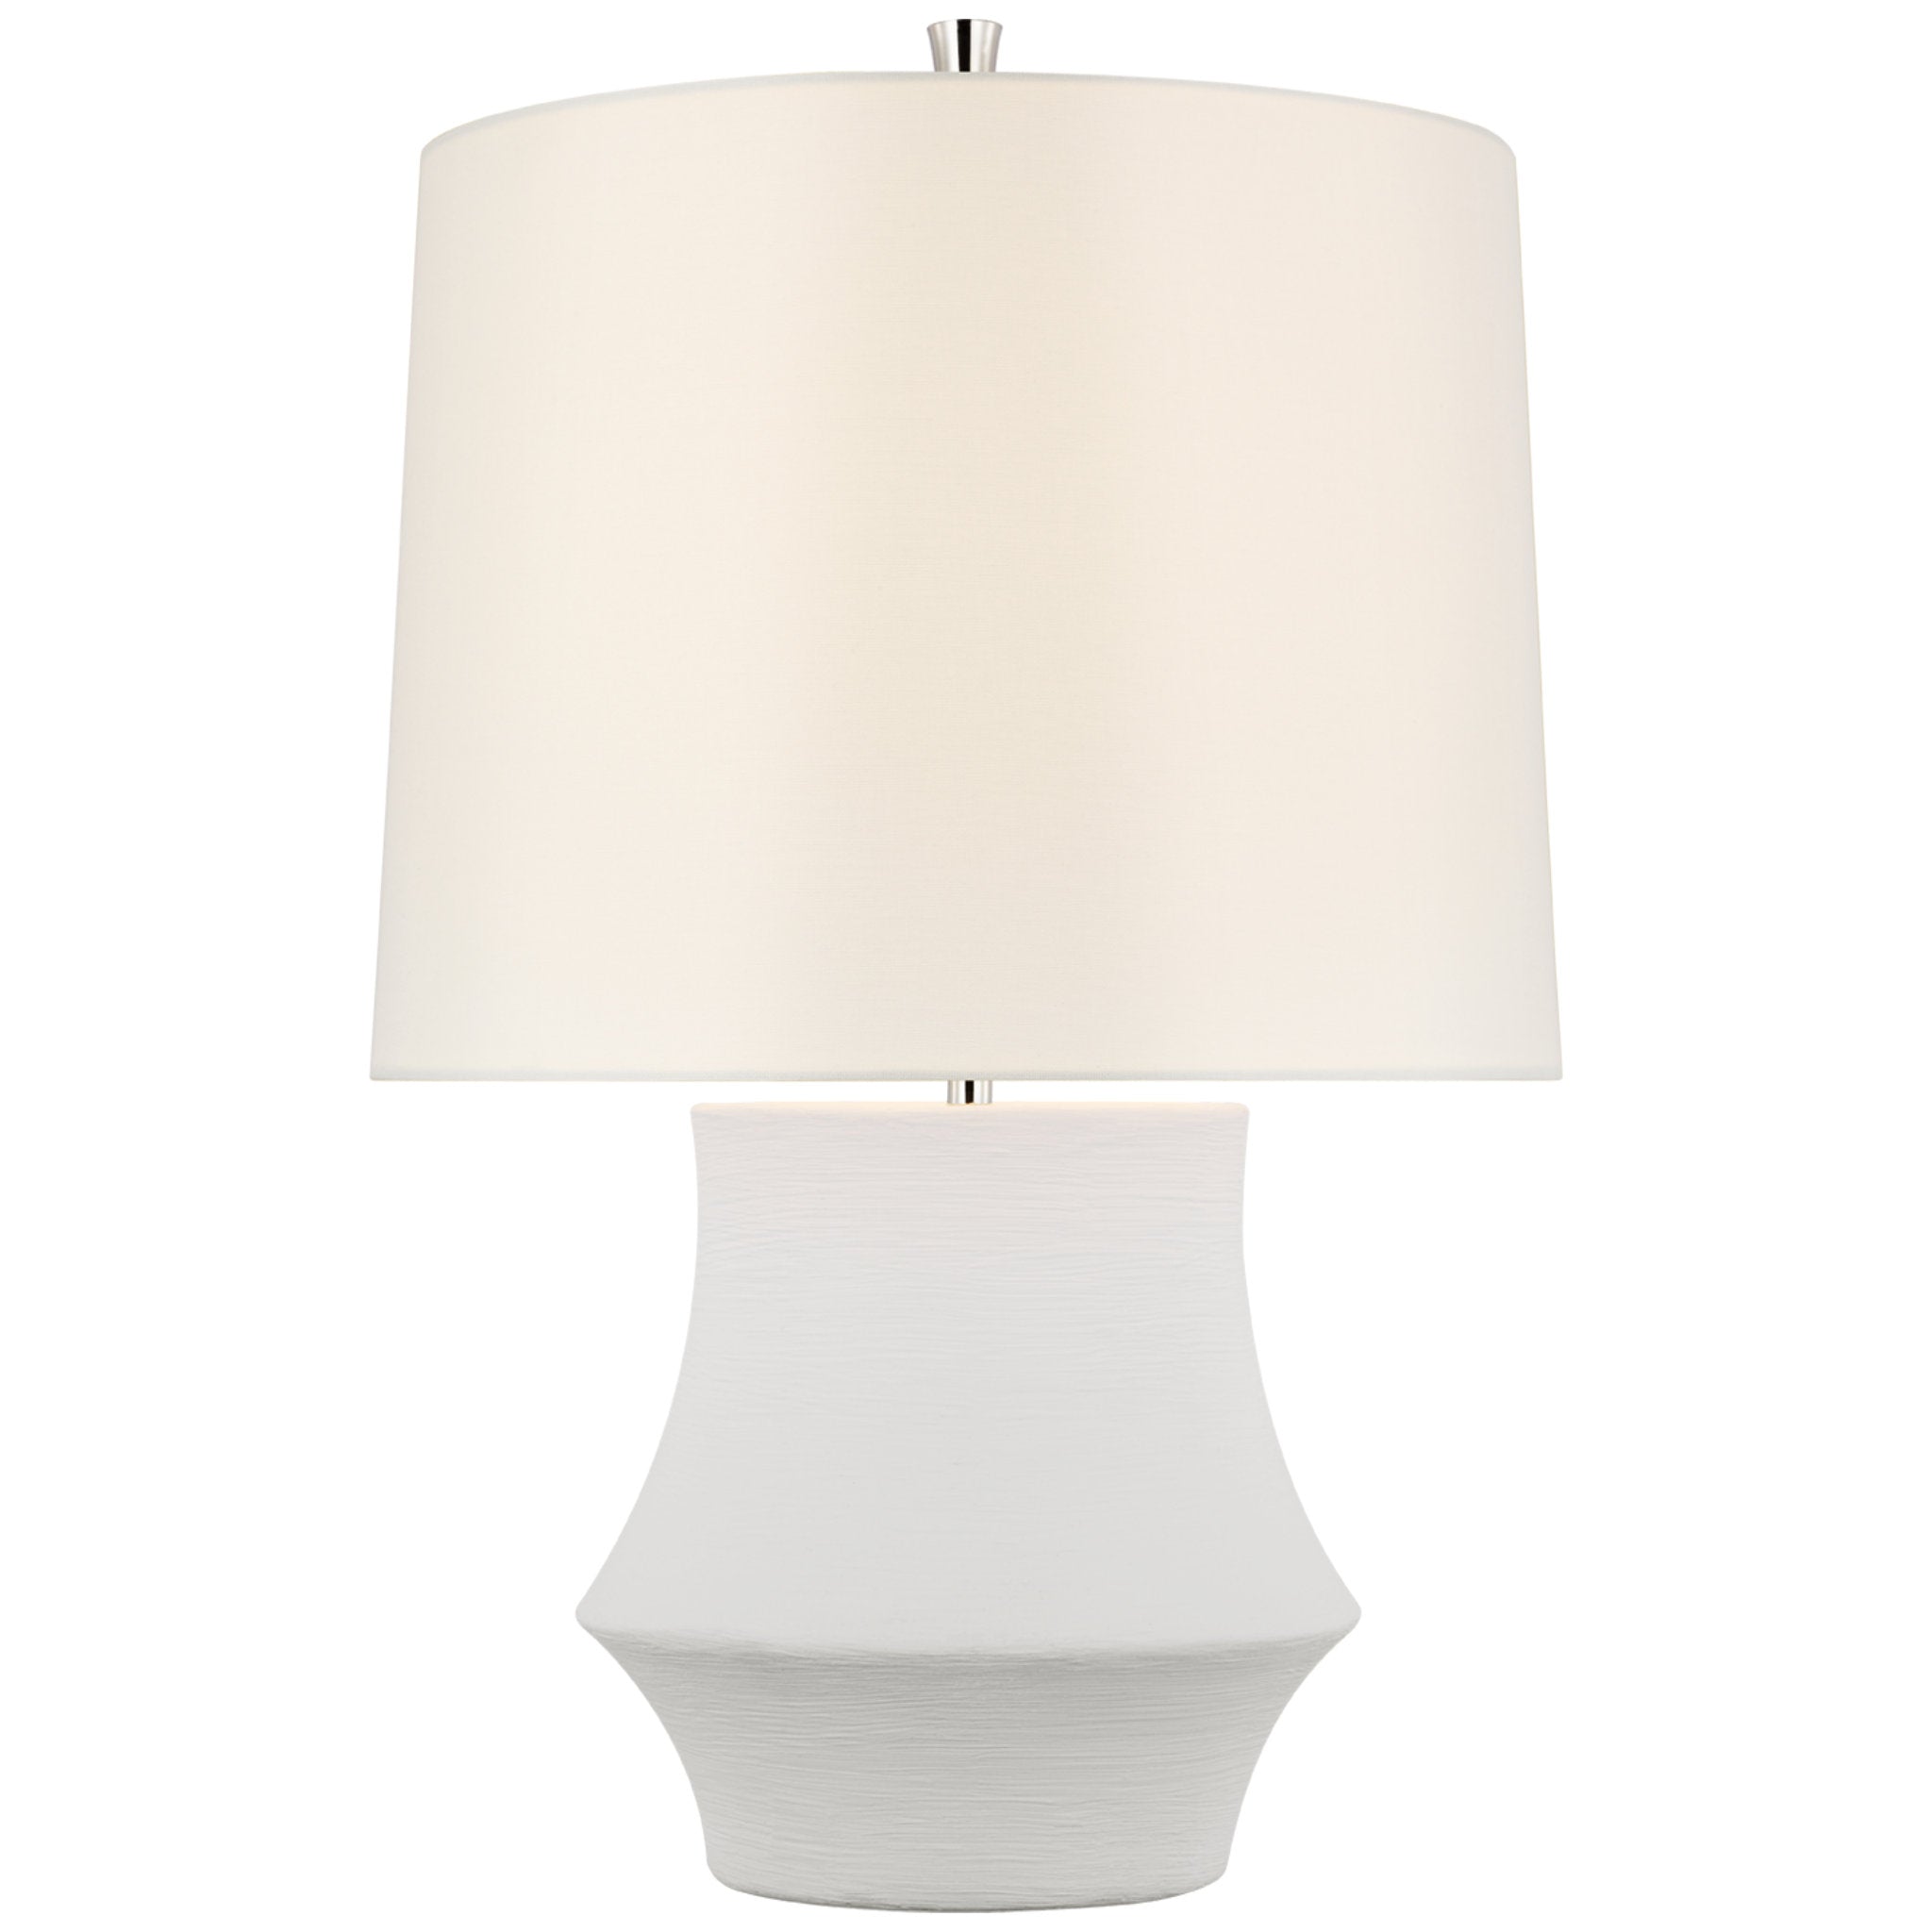 AERIN Lakmos Small Table Lamp in Plaster White with Linen Shade